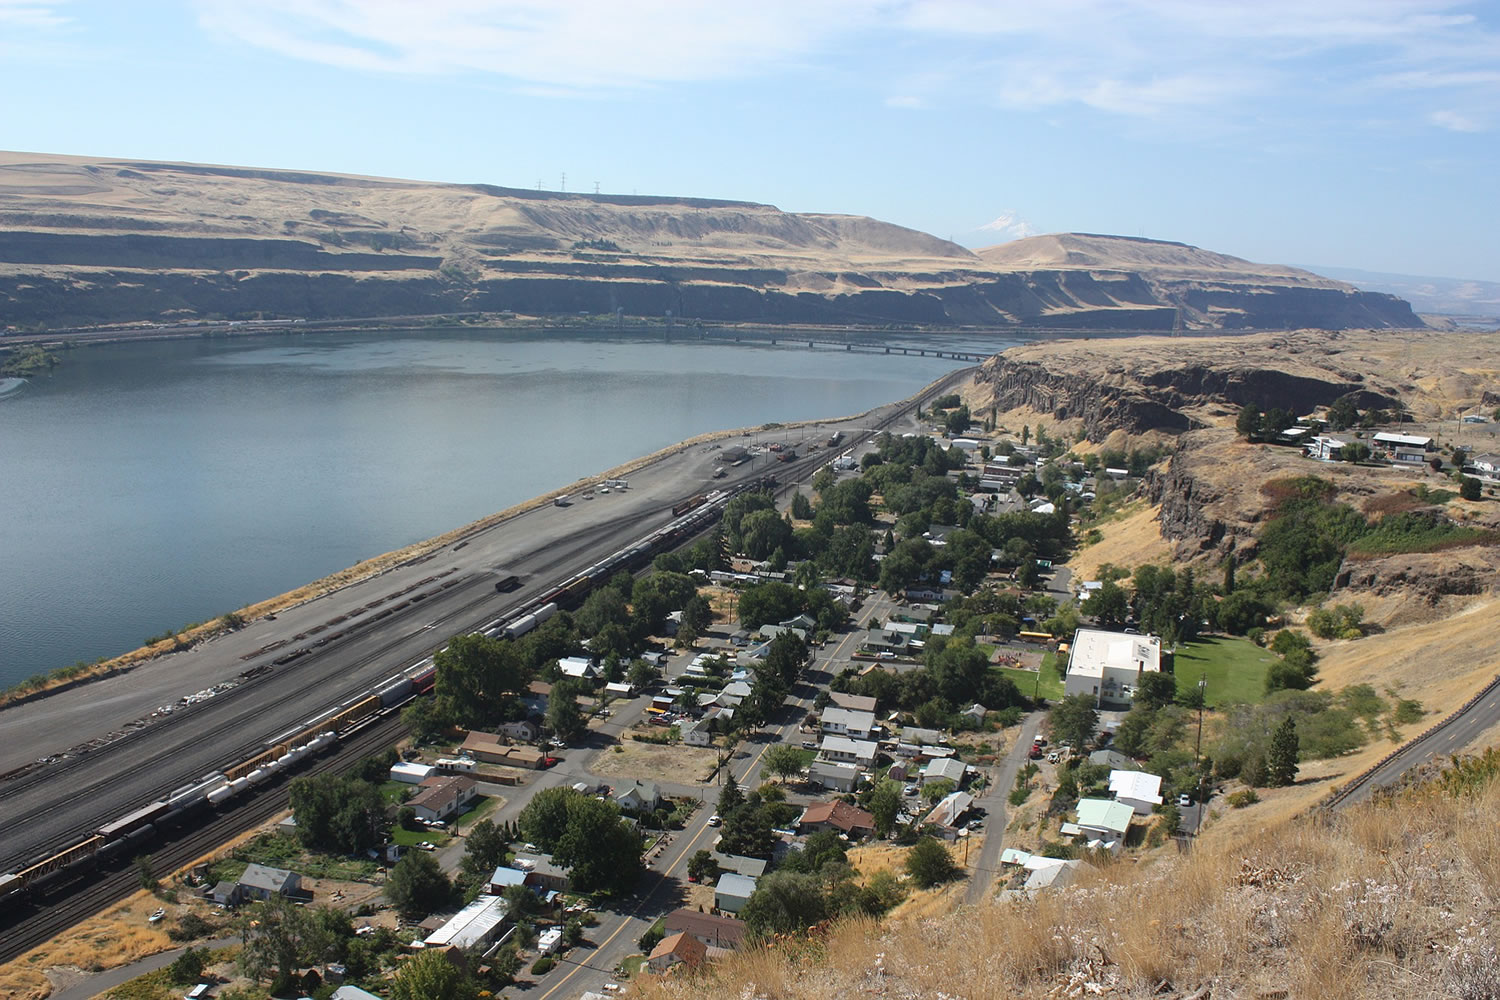 The town of Wishram along the Columbia River, with the railroad bridge linking Oregon and Washington in the background.